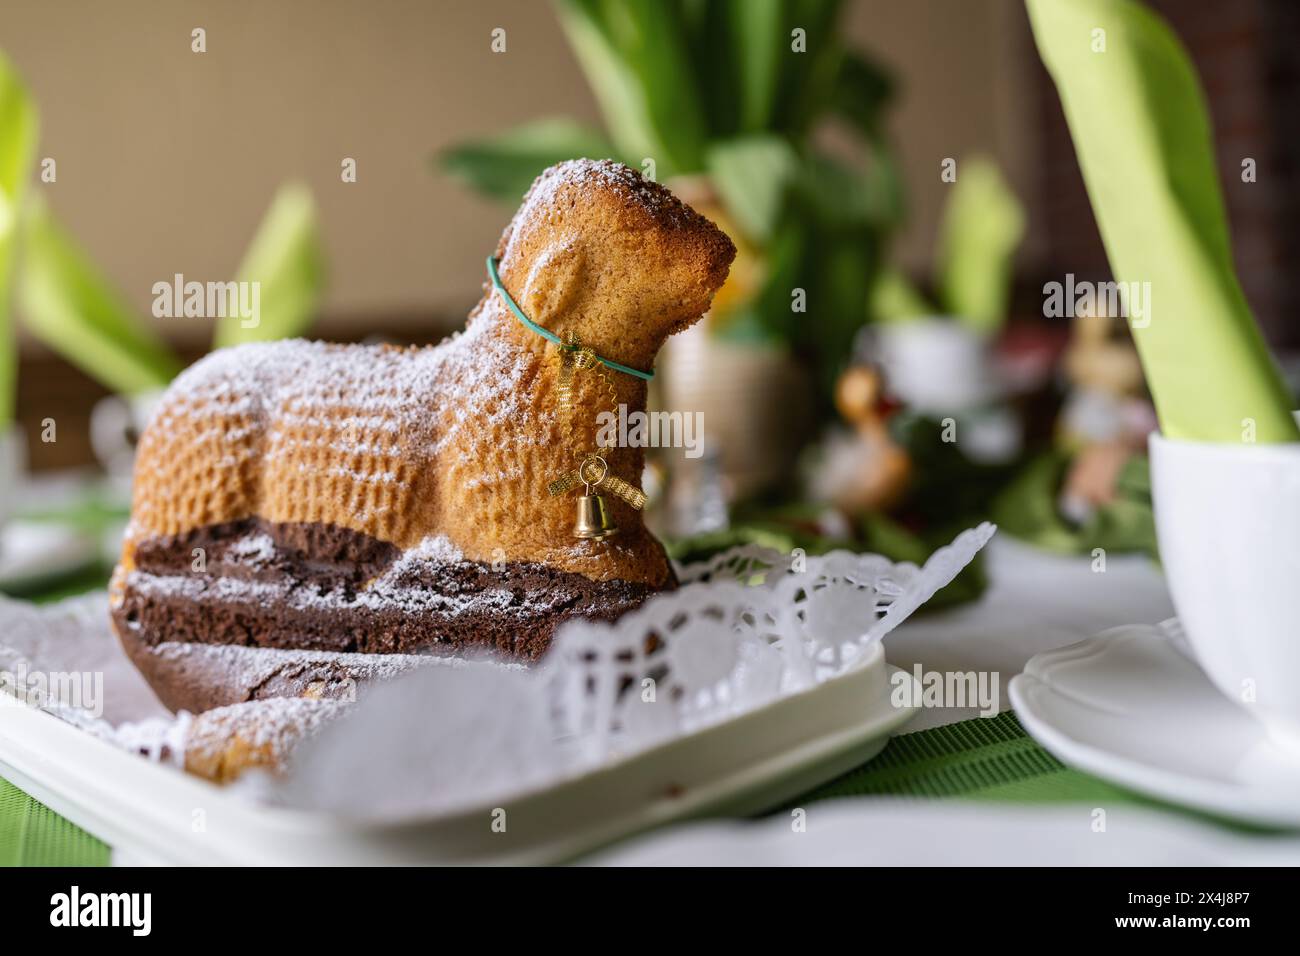 Close-up of a lamb-shaped Easter cake with sugar dusting on a decorated table. Stock Photo